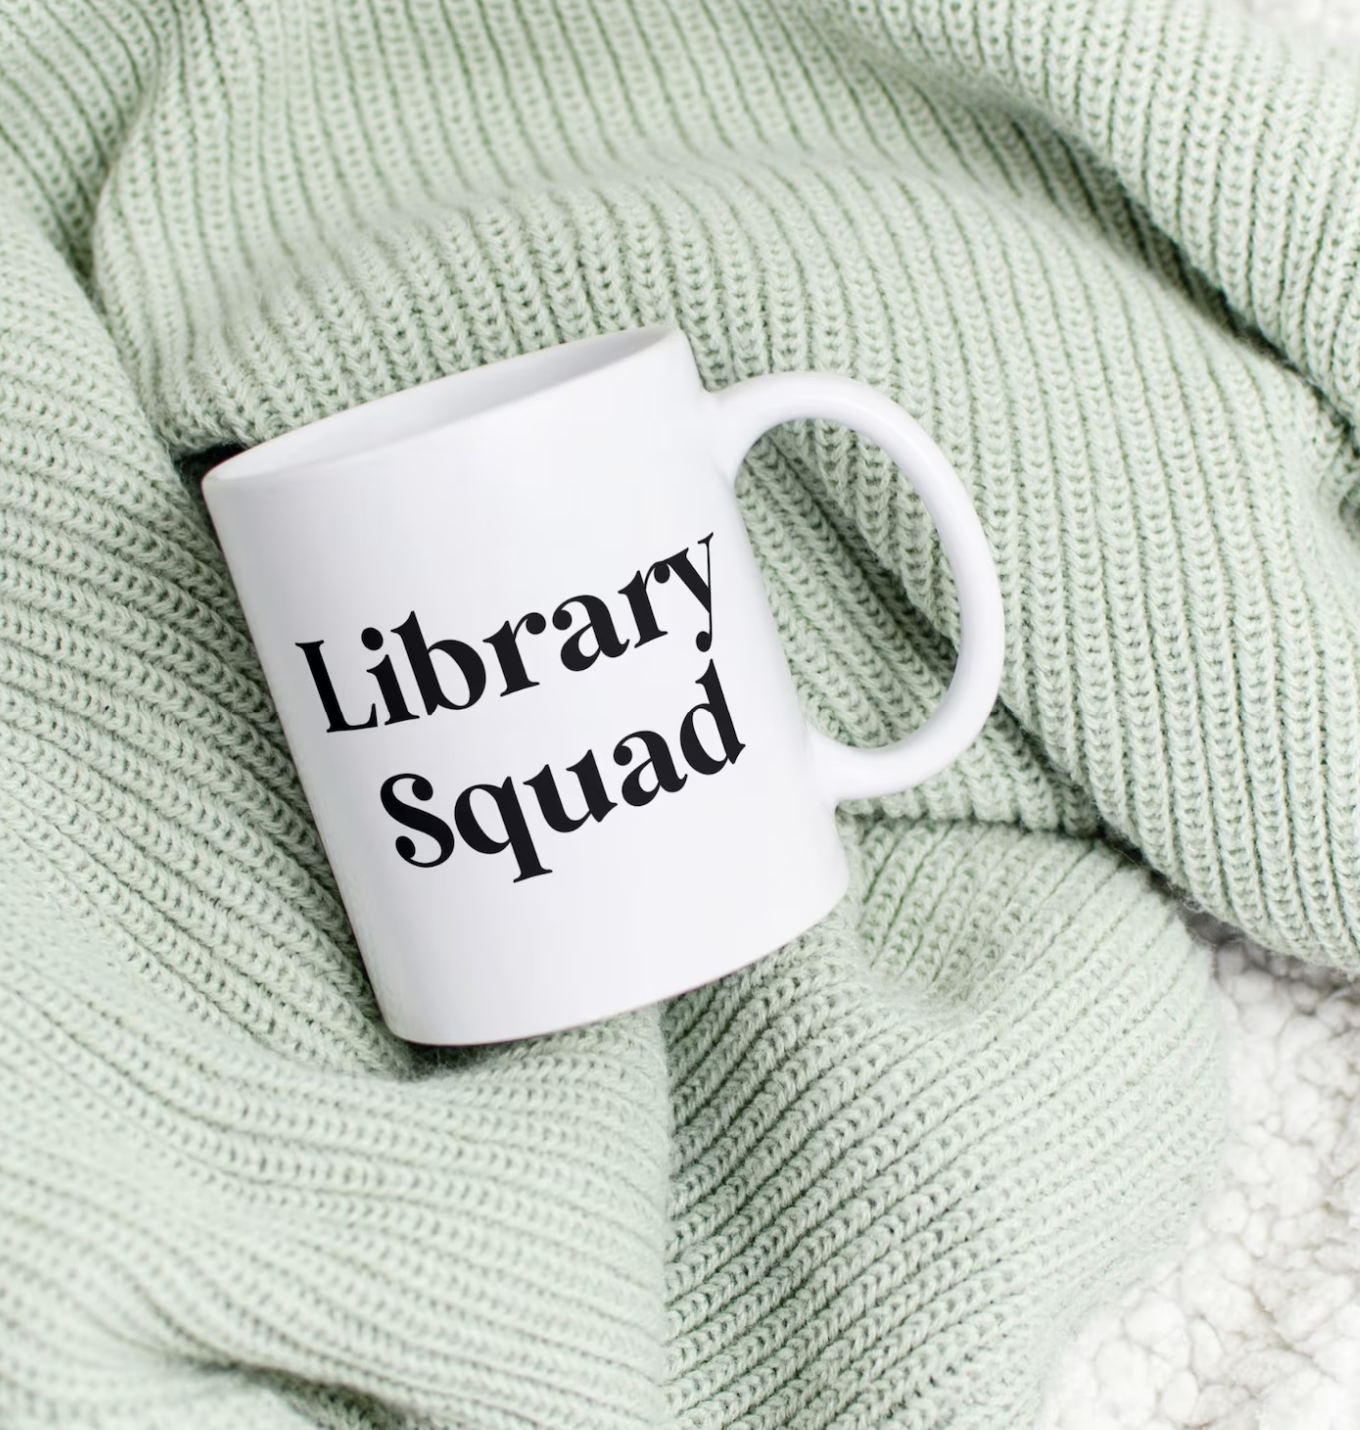 A white coffee mug with black text reading "library squad" laid against a pastel green knit blanket